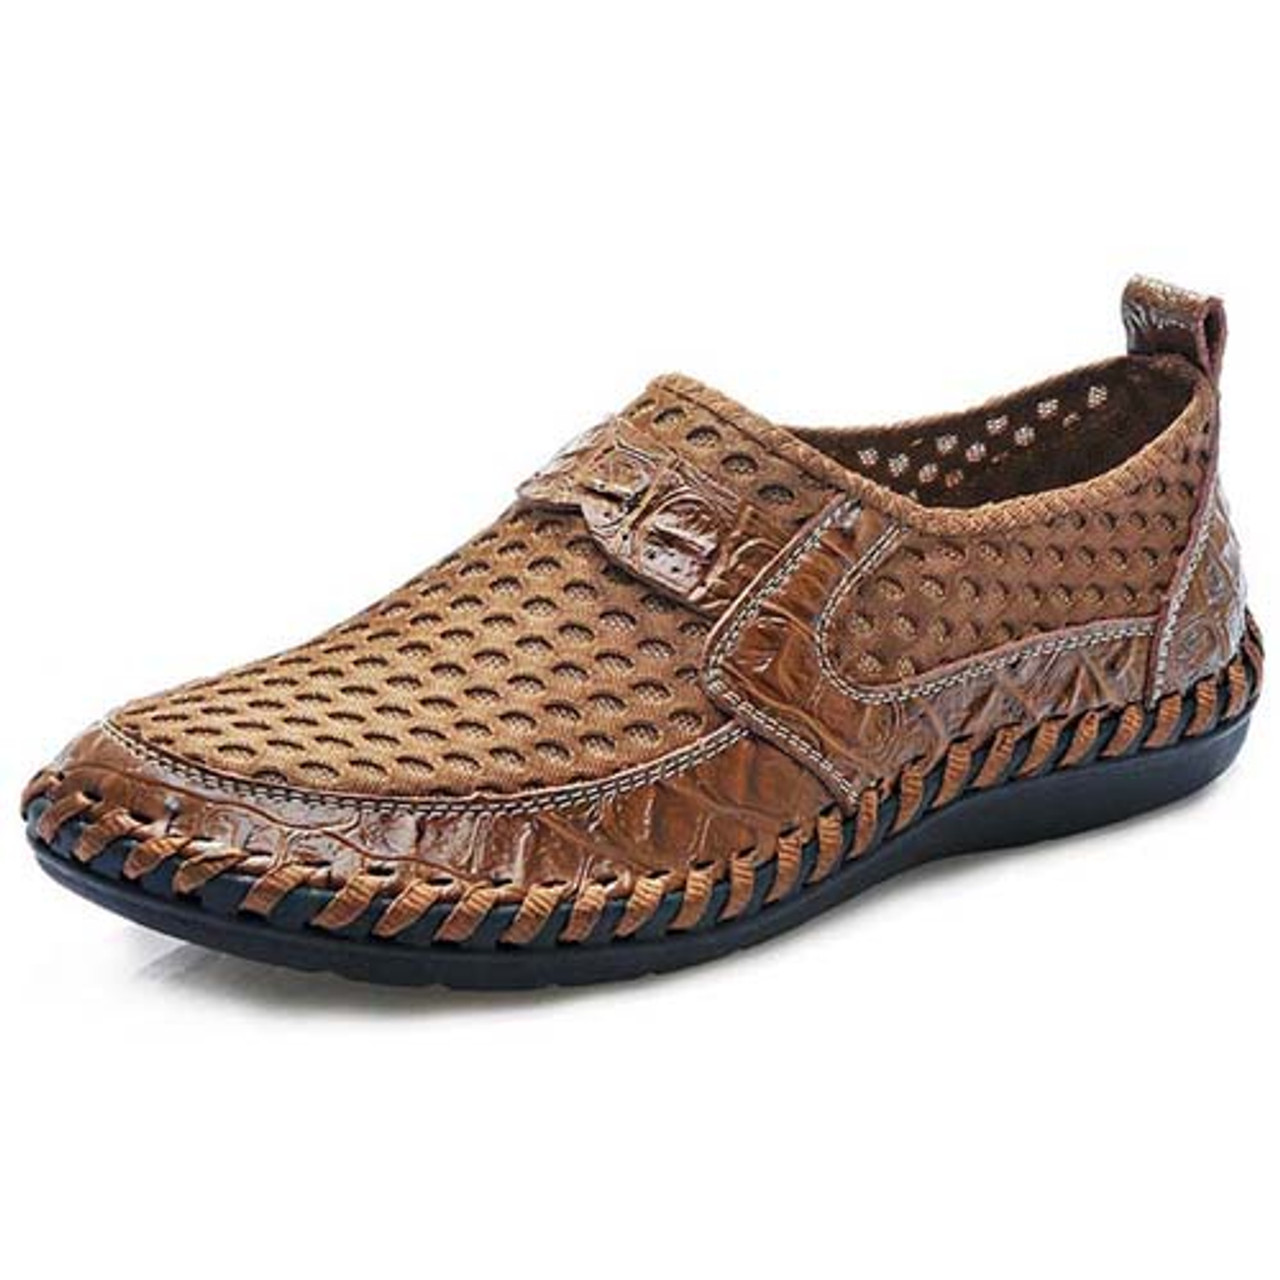 Men's brown casual mesh leather slip on 